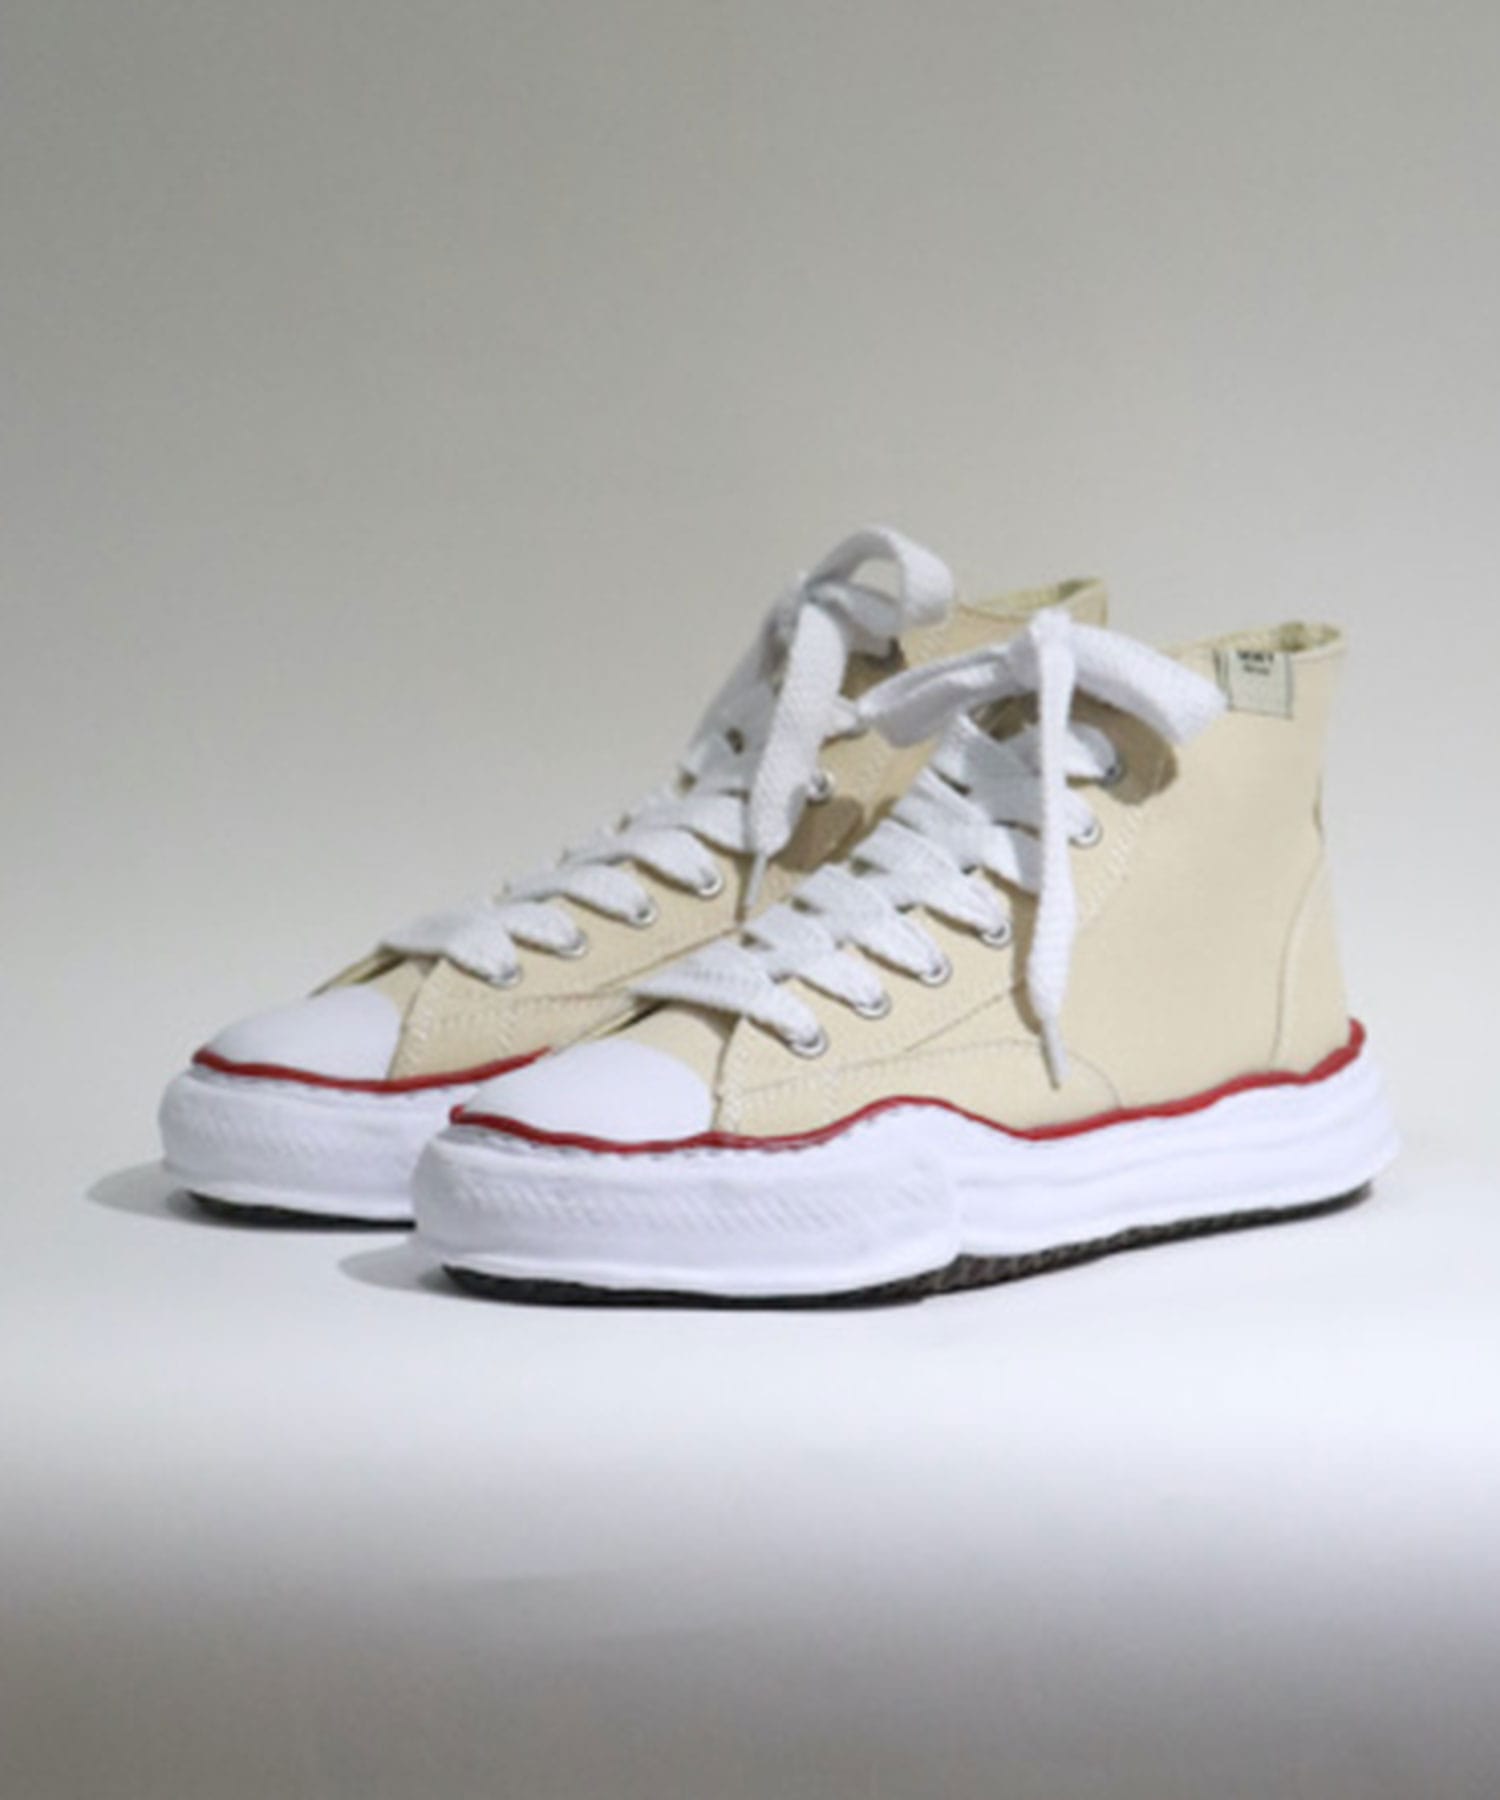 PETERSON high original sole canvas high-Top sneakers